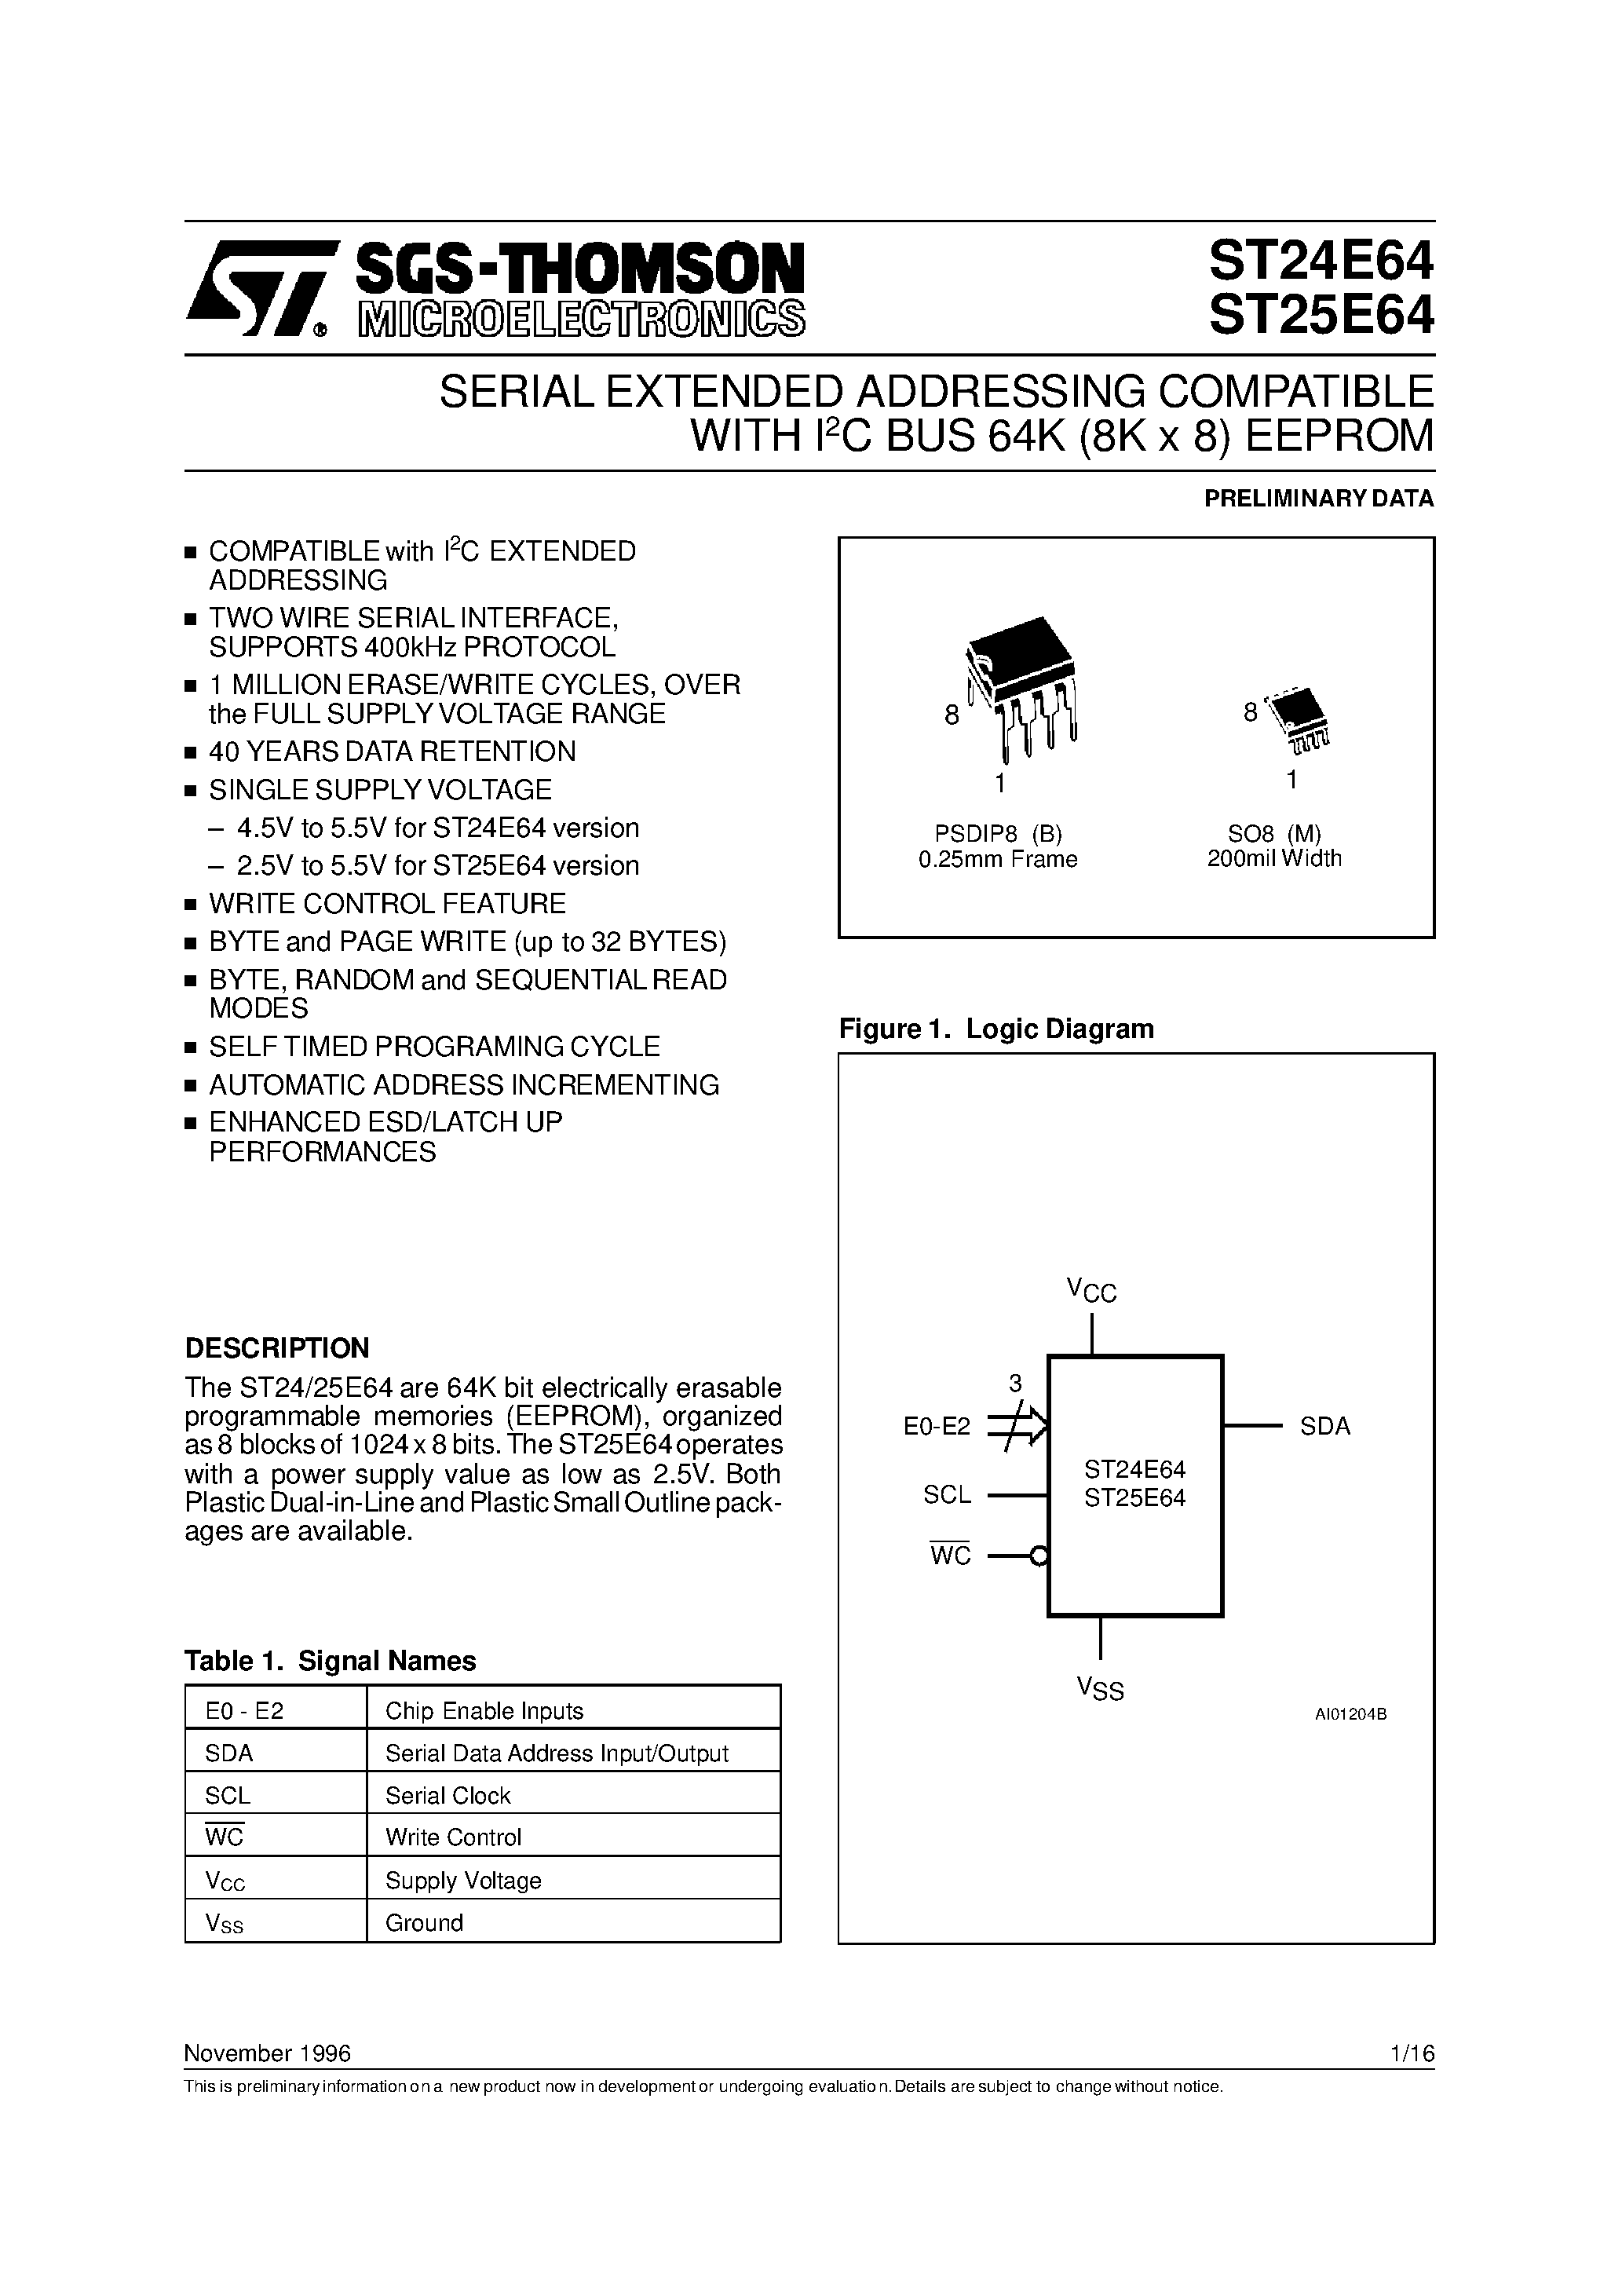 Datasheet ST24E64 - (ST24E64 / ST25E64) SERIAL EXTENDED ADDRESSING COMPATIBLE WITH I2C BUS 64K (8K x 8) EEPROM page 1